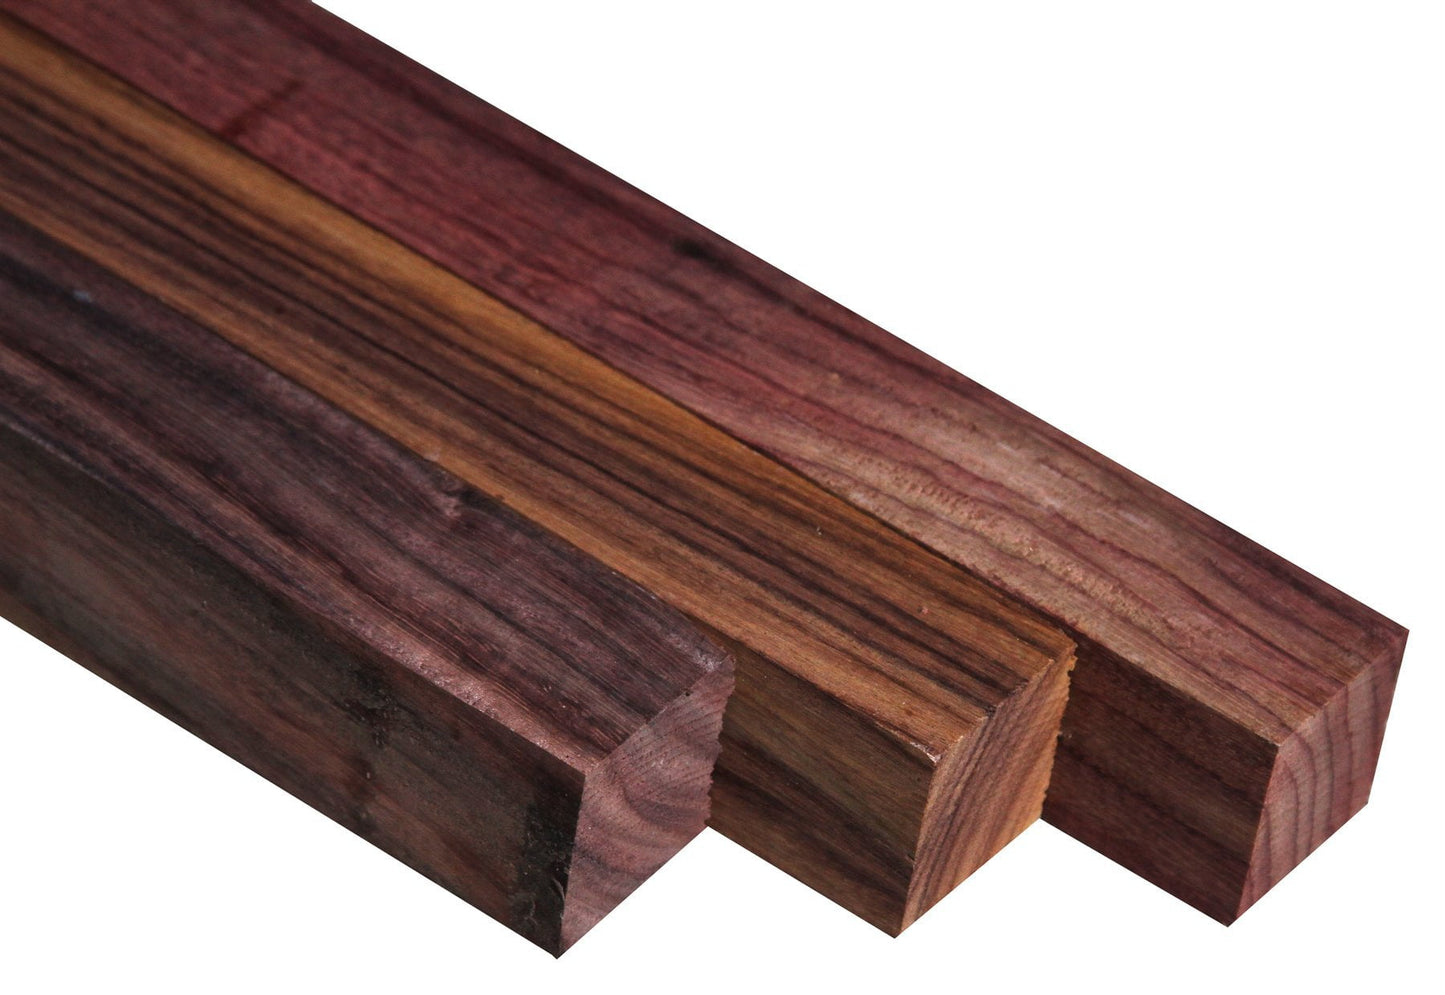 East Indian Rosewood Turning Square (18" x 1-1/2" x 1-1/2")